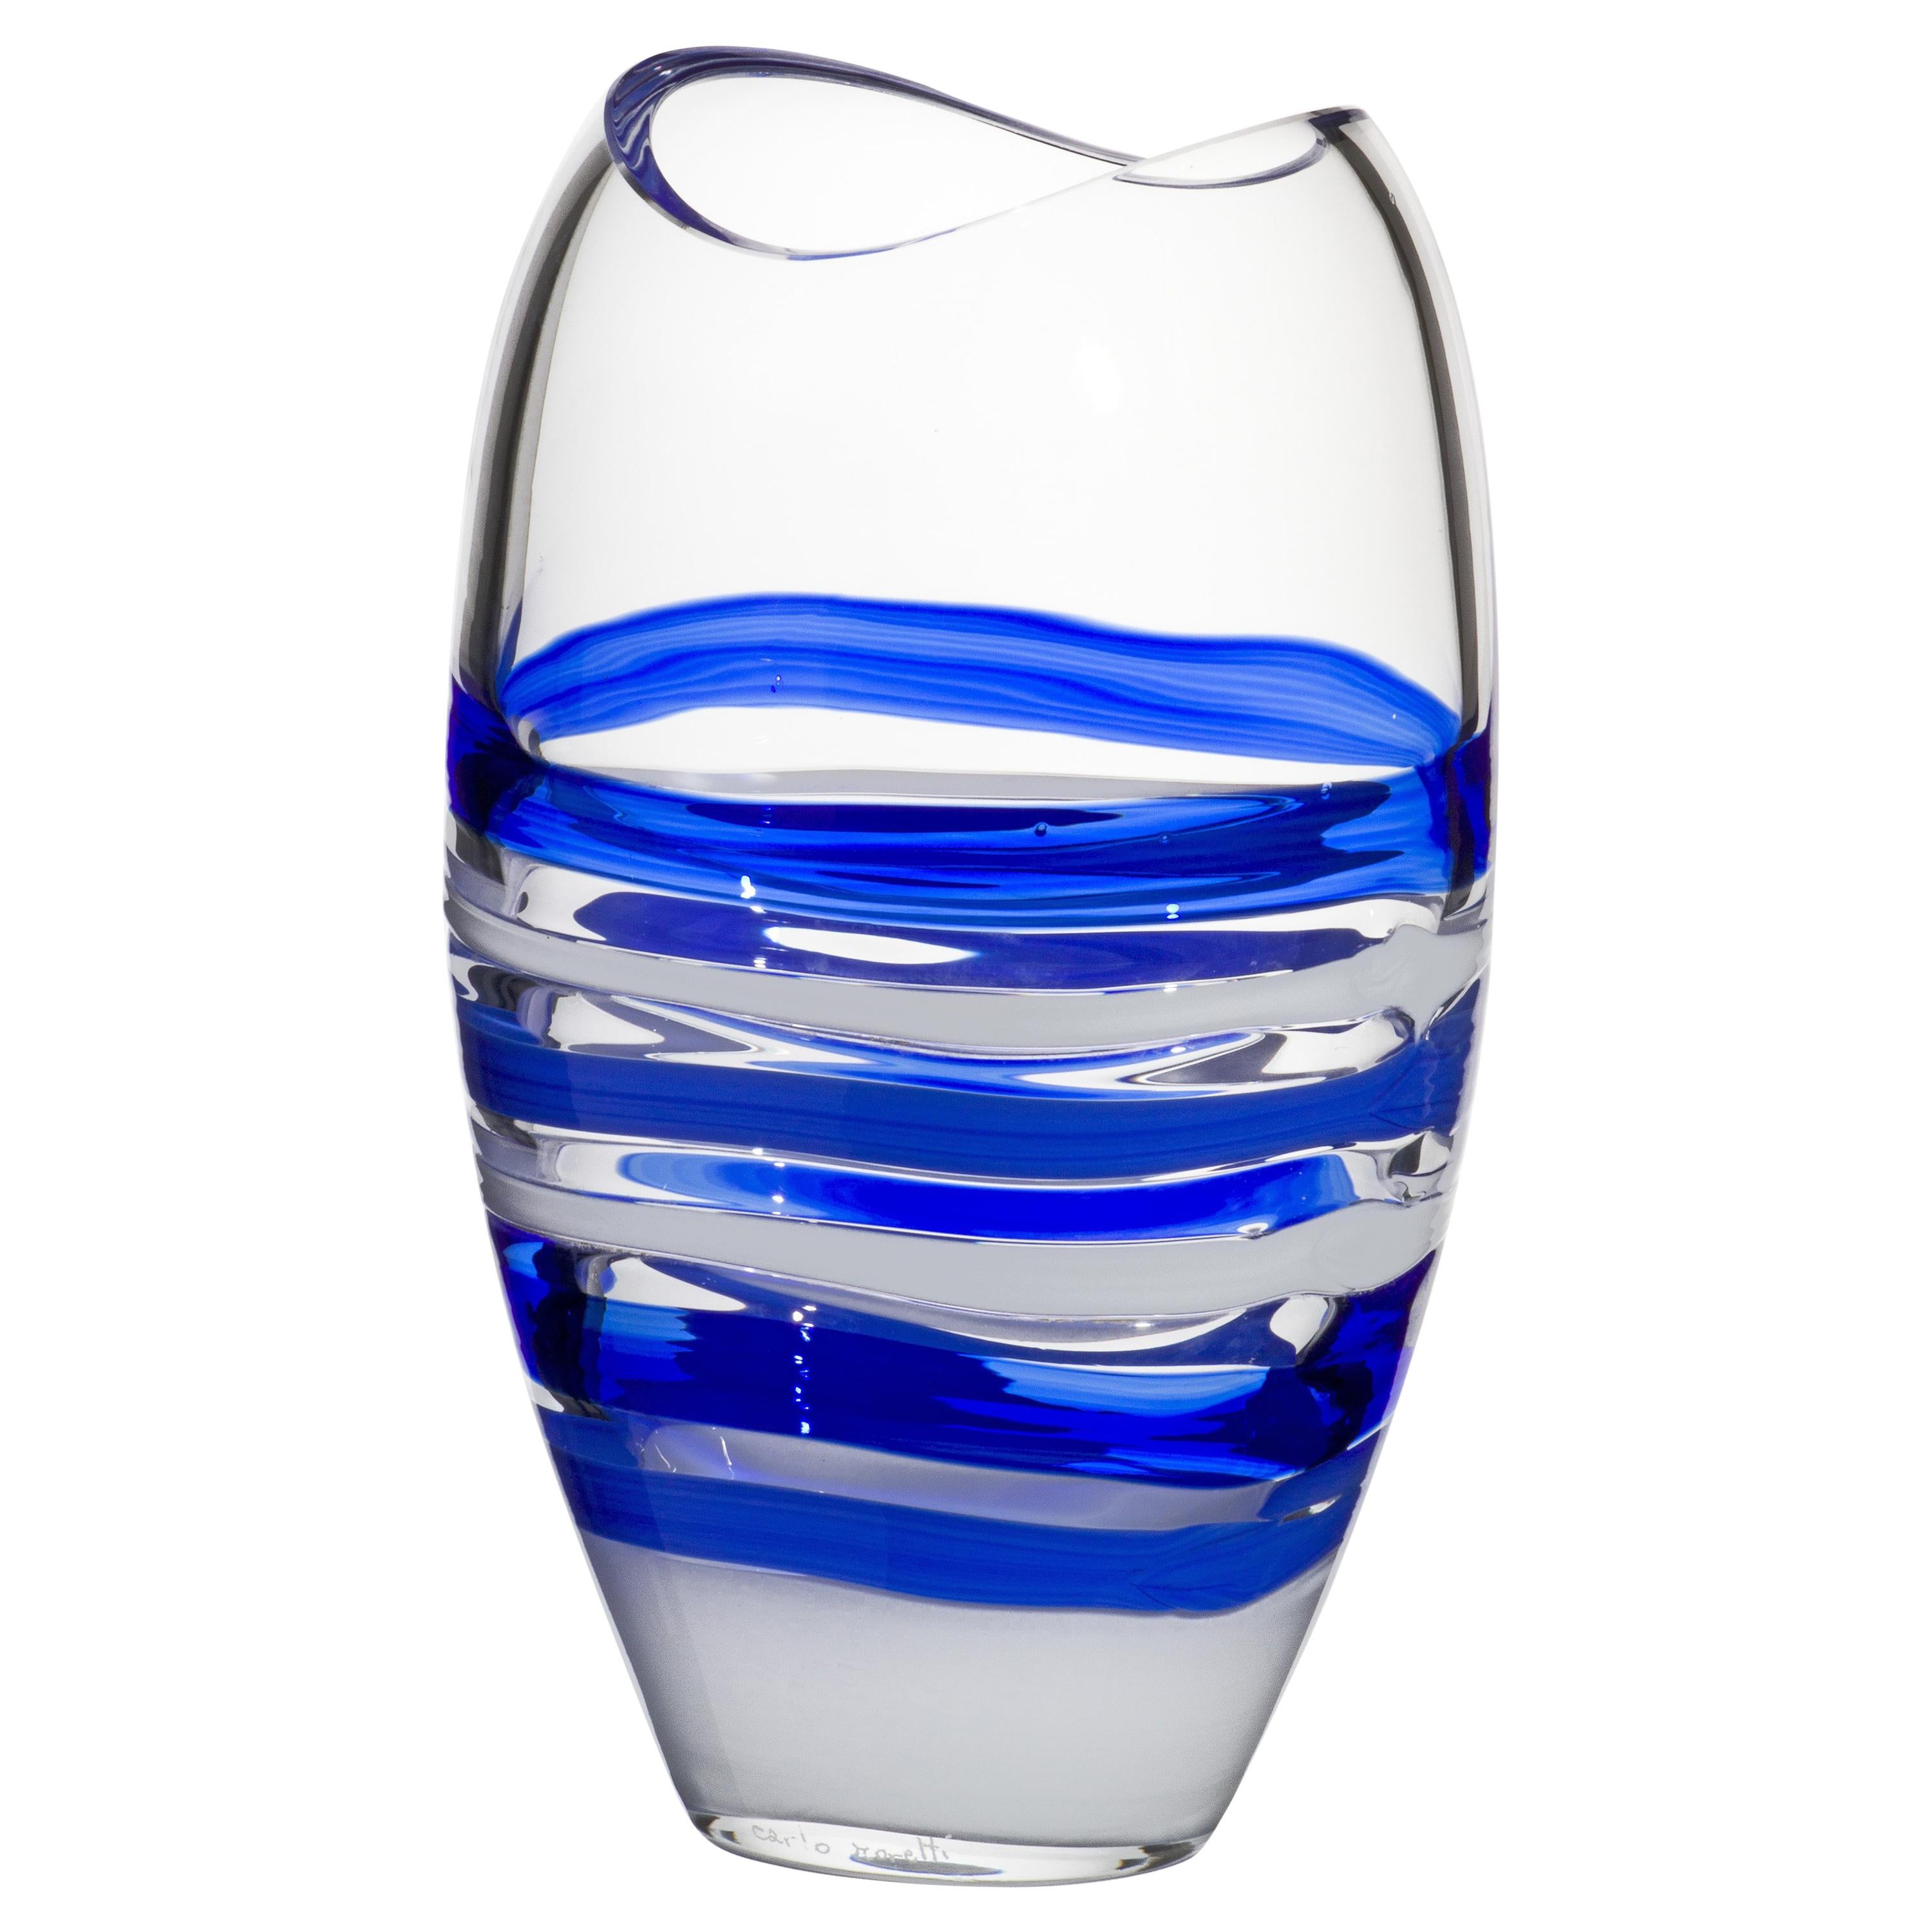 Small Ellisse Vase in Blue and White by Carlo Moretti For Sale